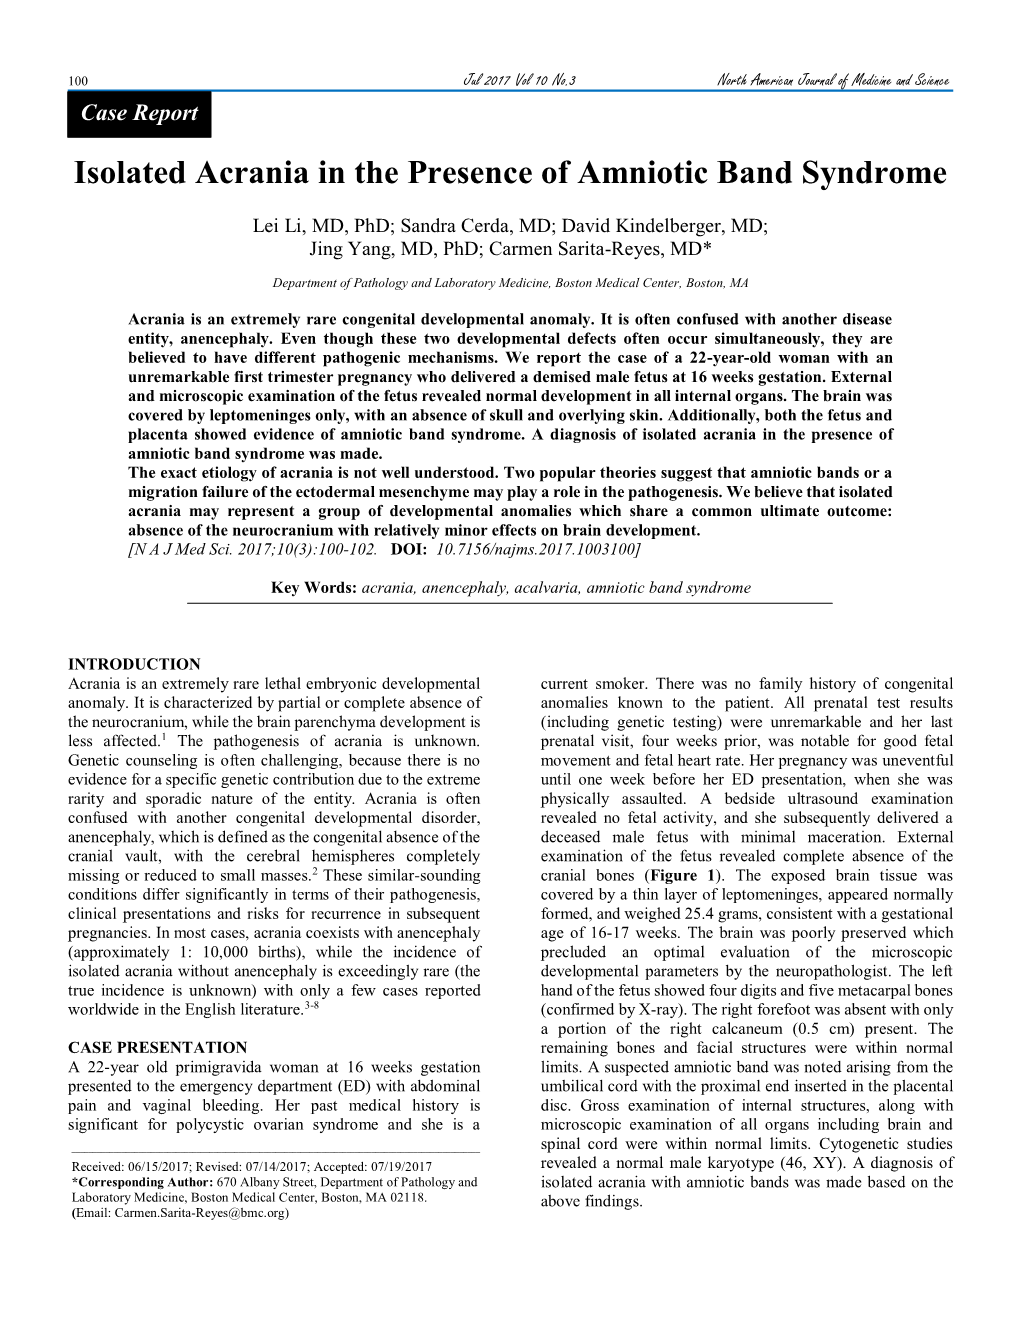 Isolated Acrania in the Presence of Amniotic Band Syndrome